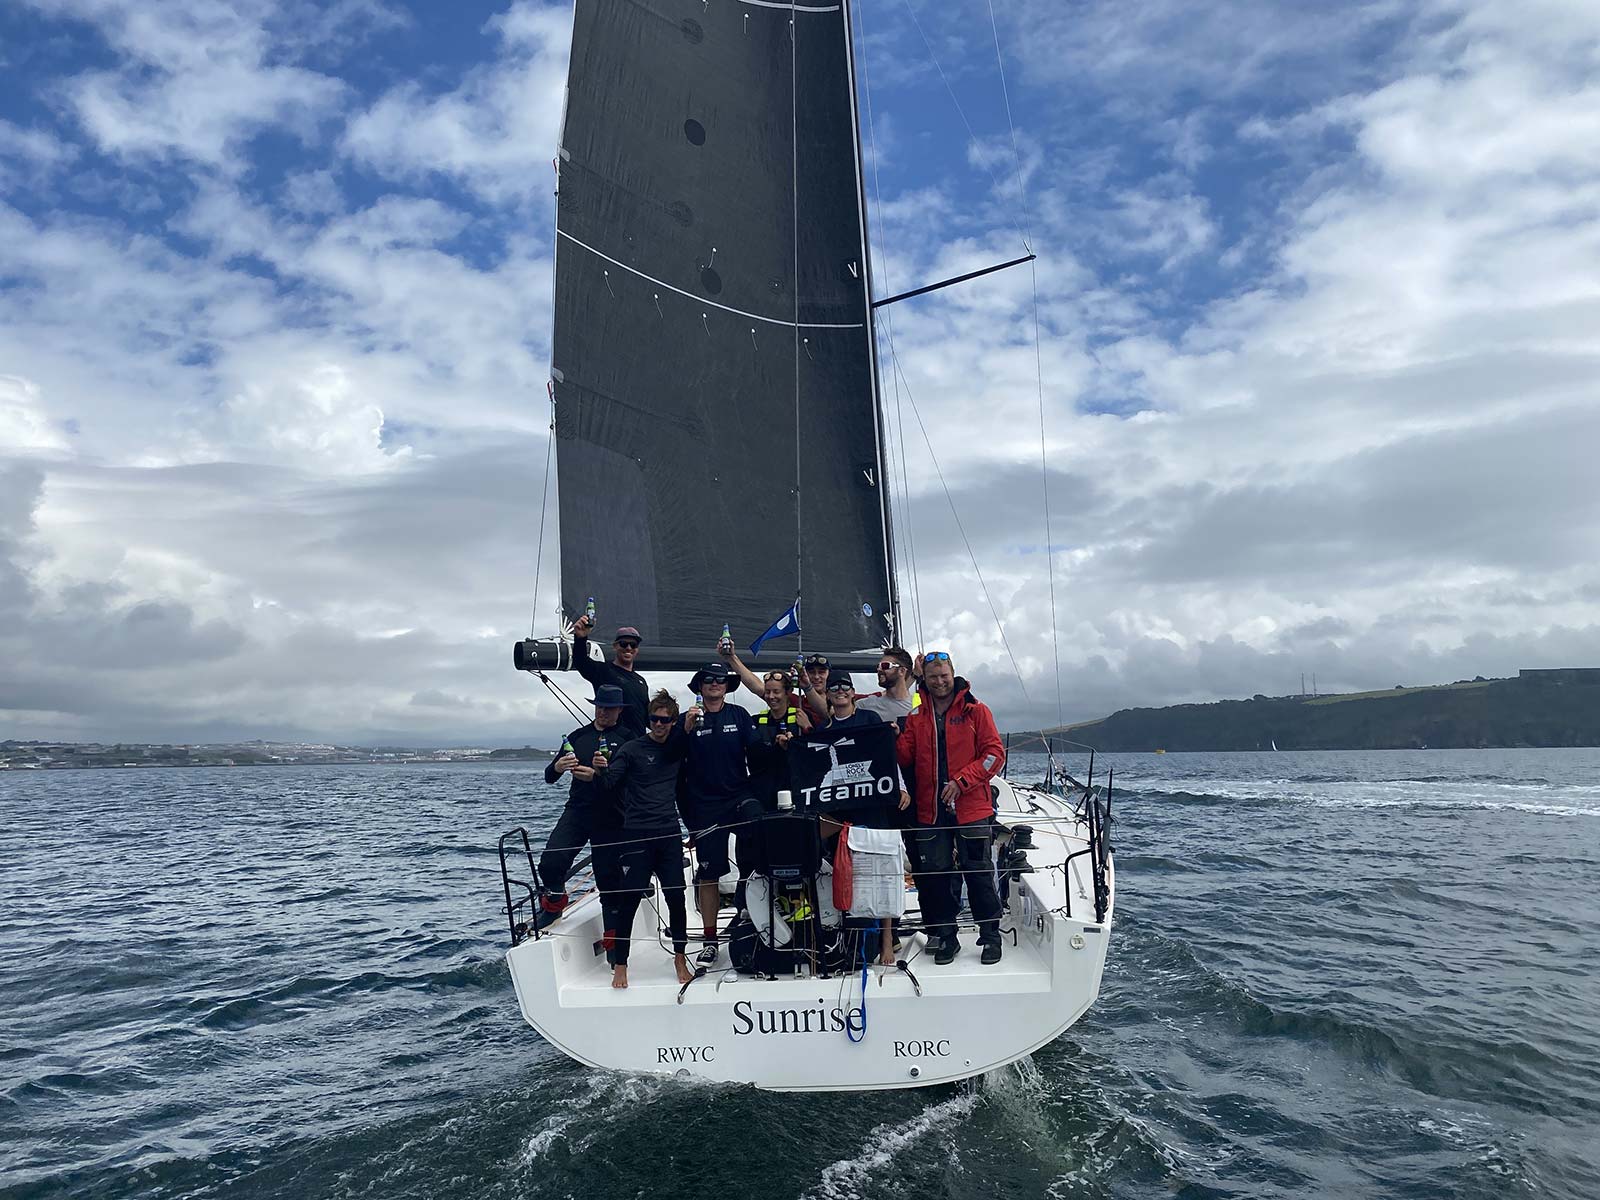 Winner of the OLR2020 'Sunrise' RWYC and RORC